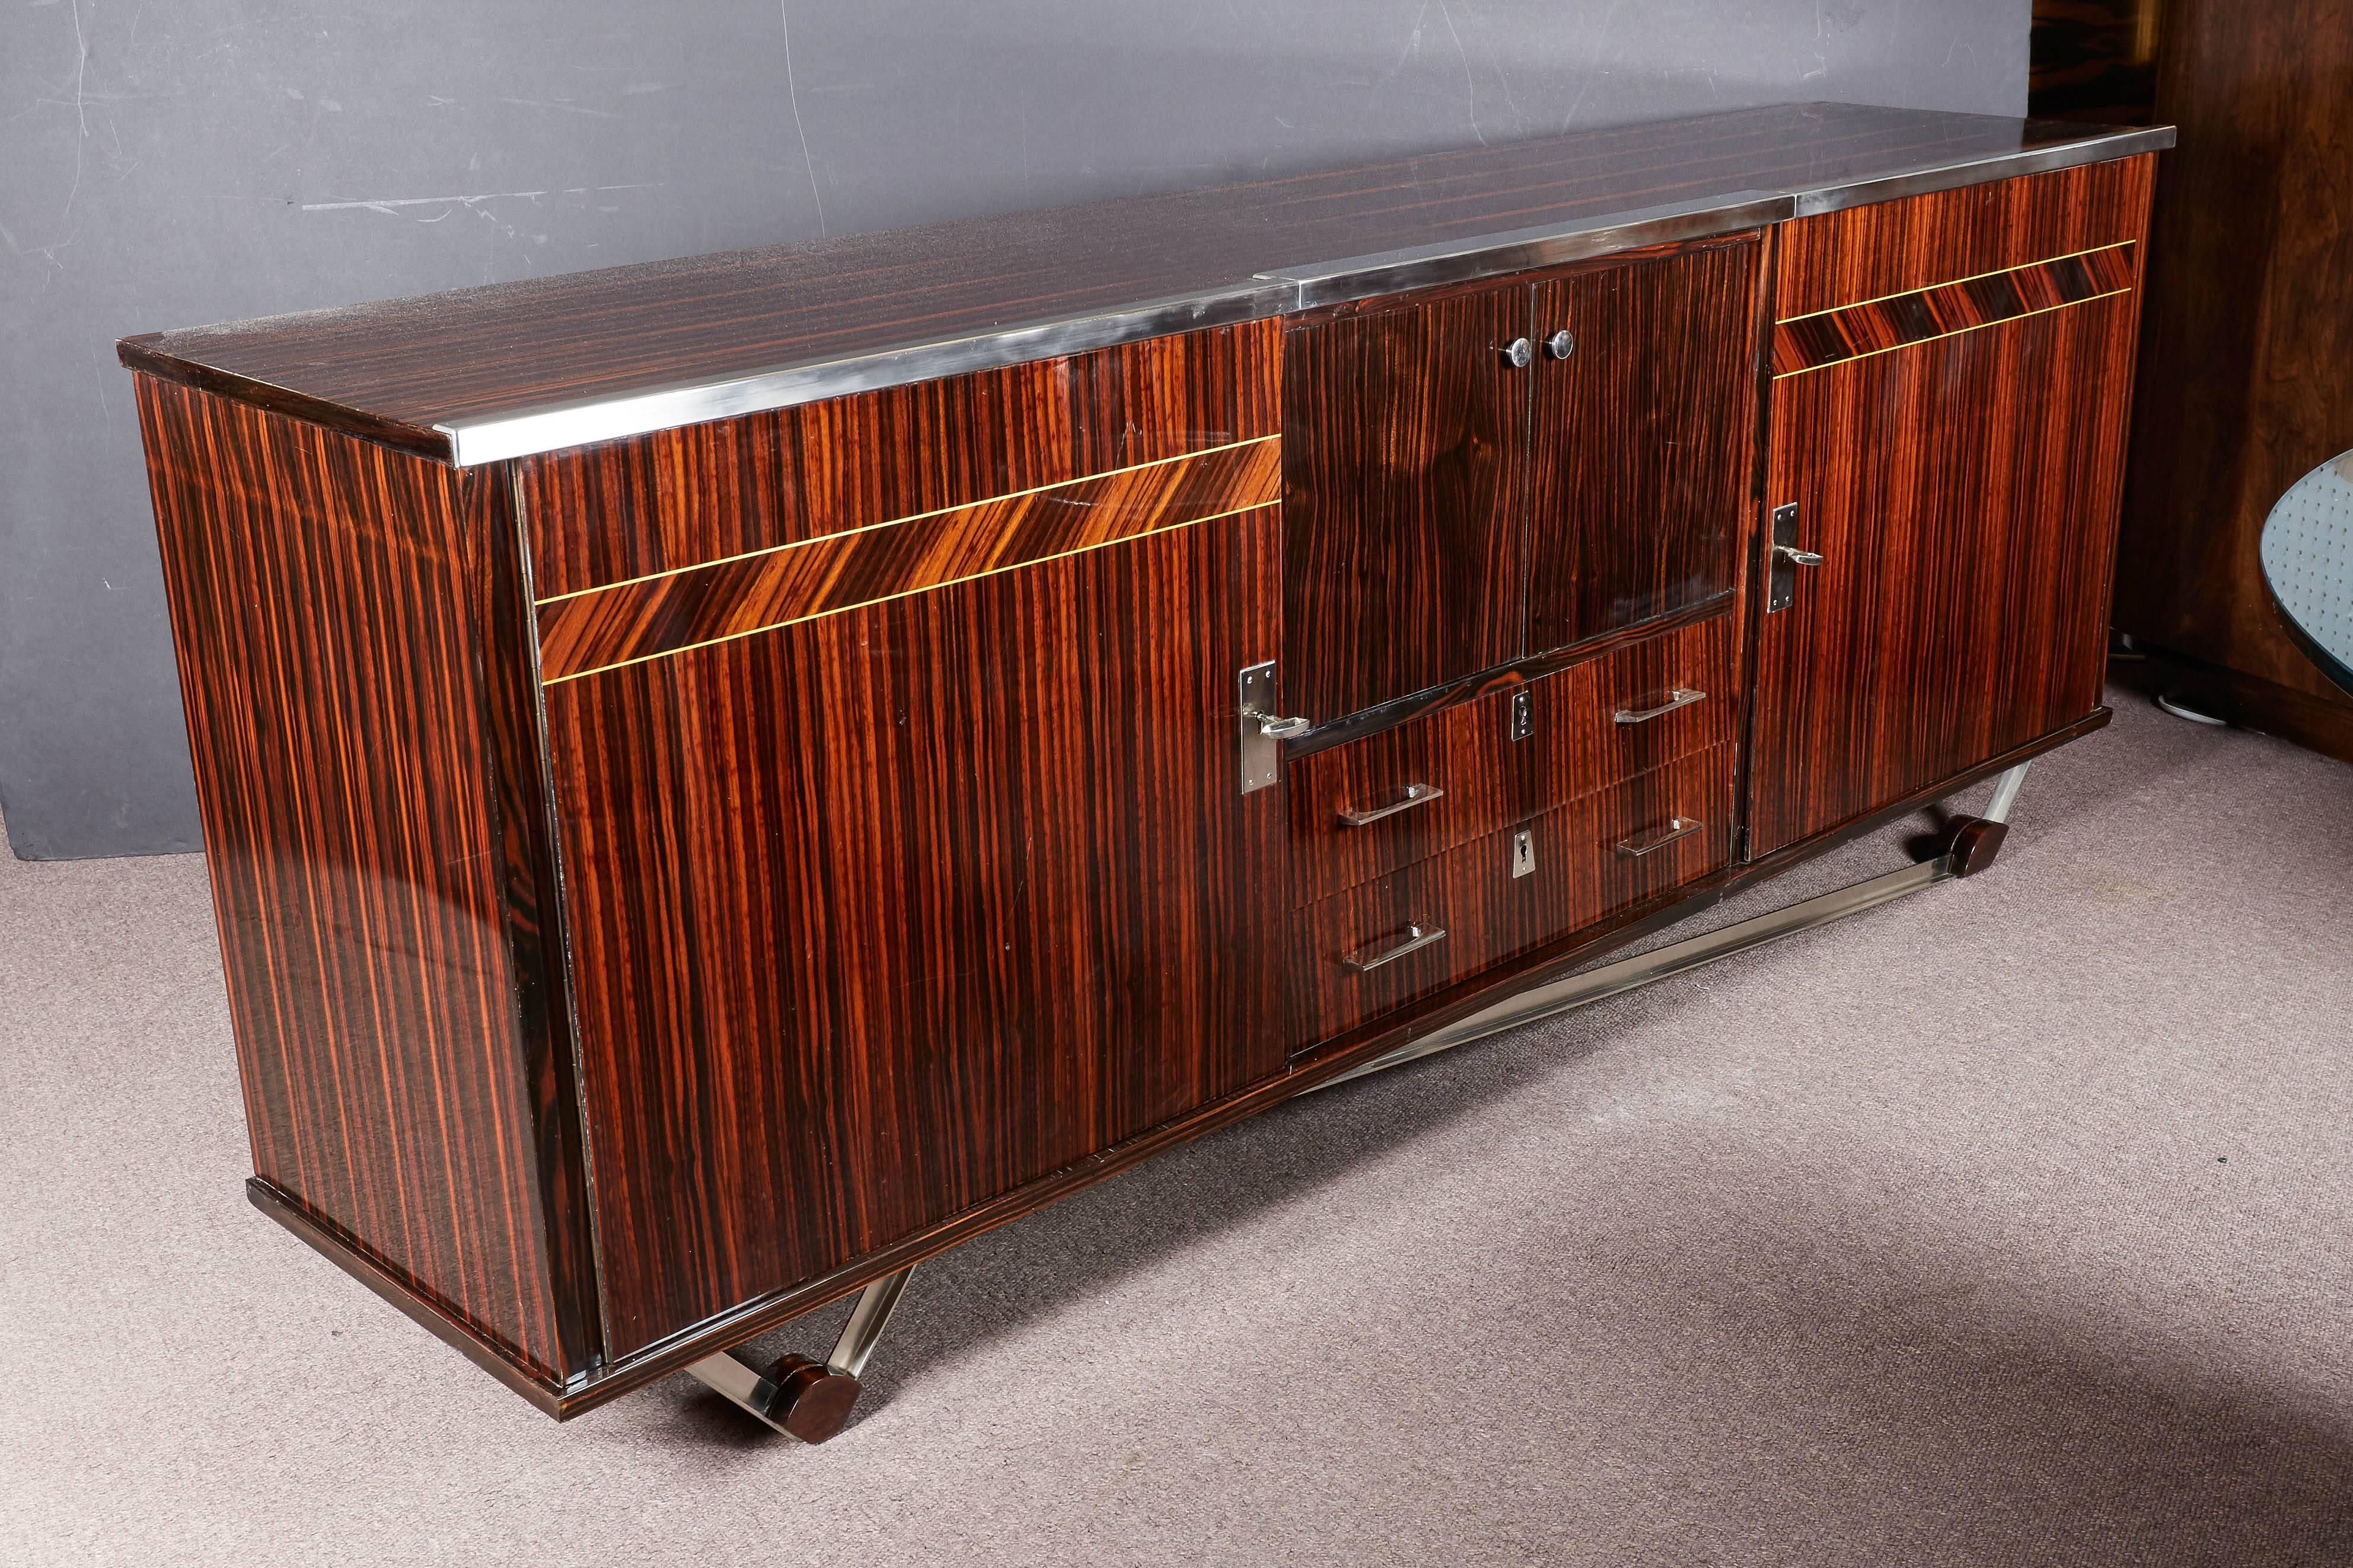 Fabulous French Art Deco high gloss lacquer exotic Macassar ebony buffet with geometric inlaid parquetry detail on doors and nickeled bronze top border, hardware and matching asymmetrical angular base.
This sleek, stream line sideboard or cabinet